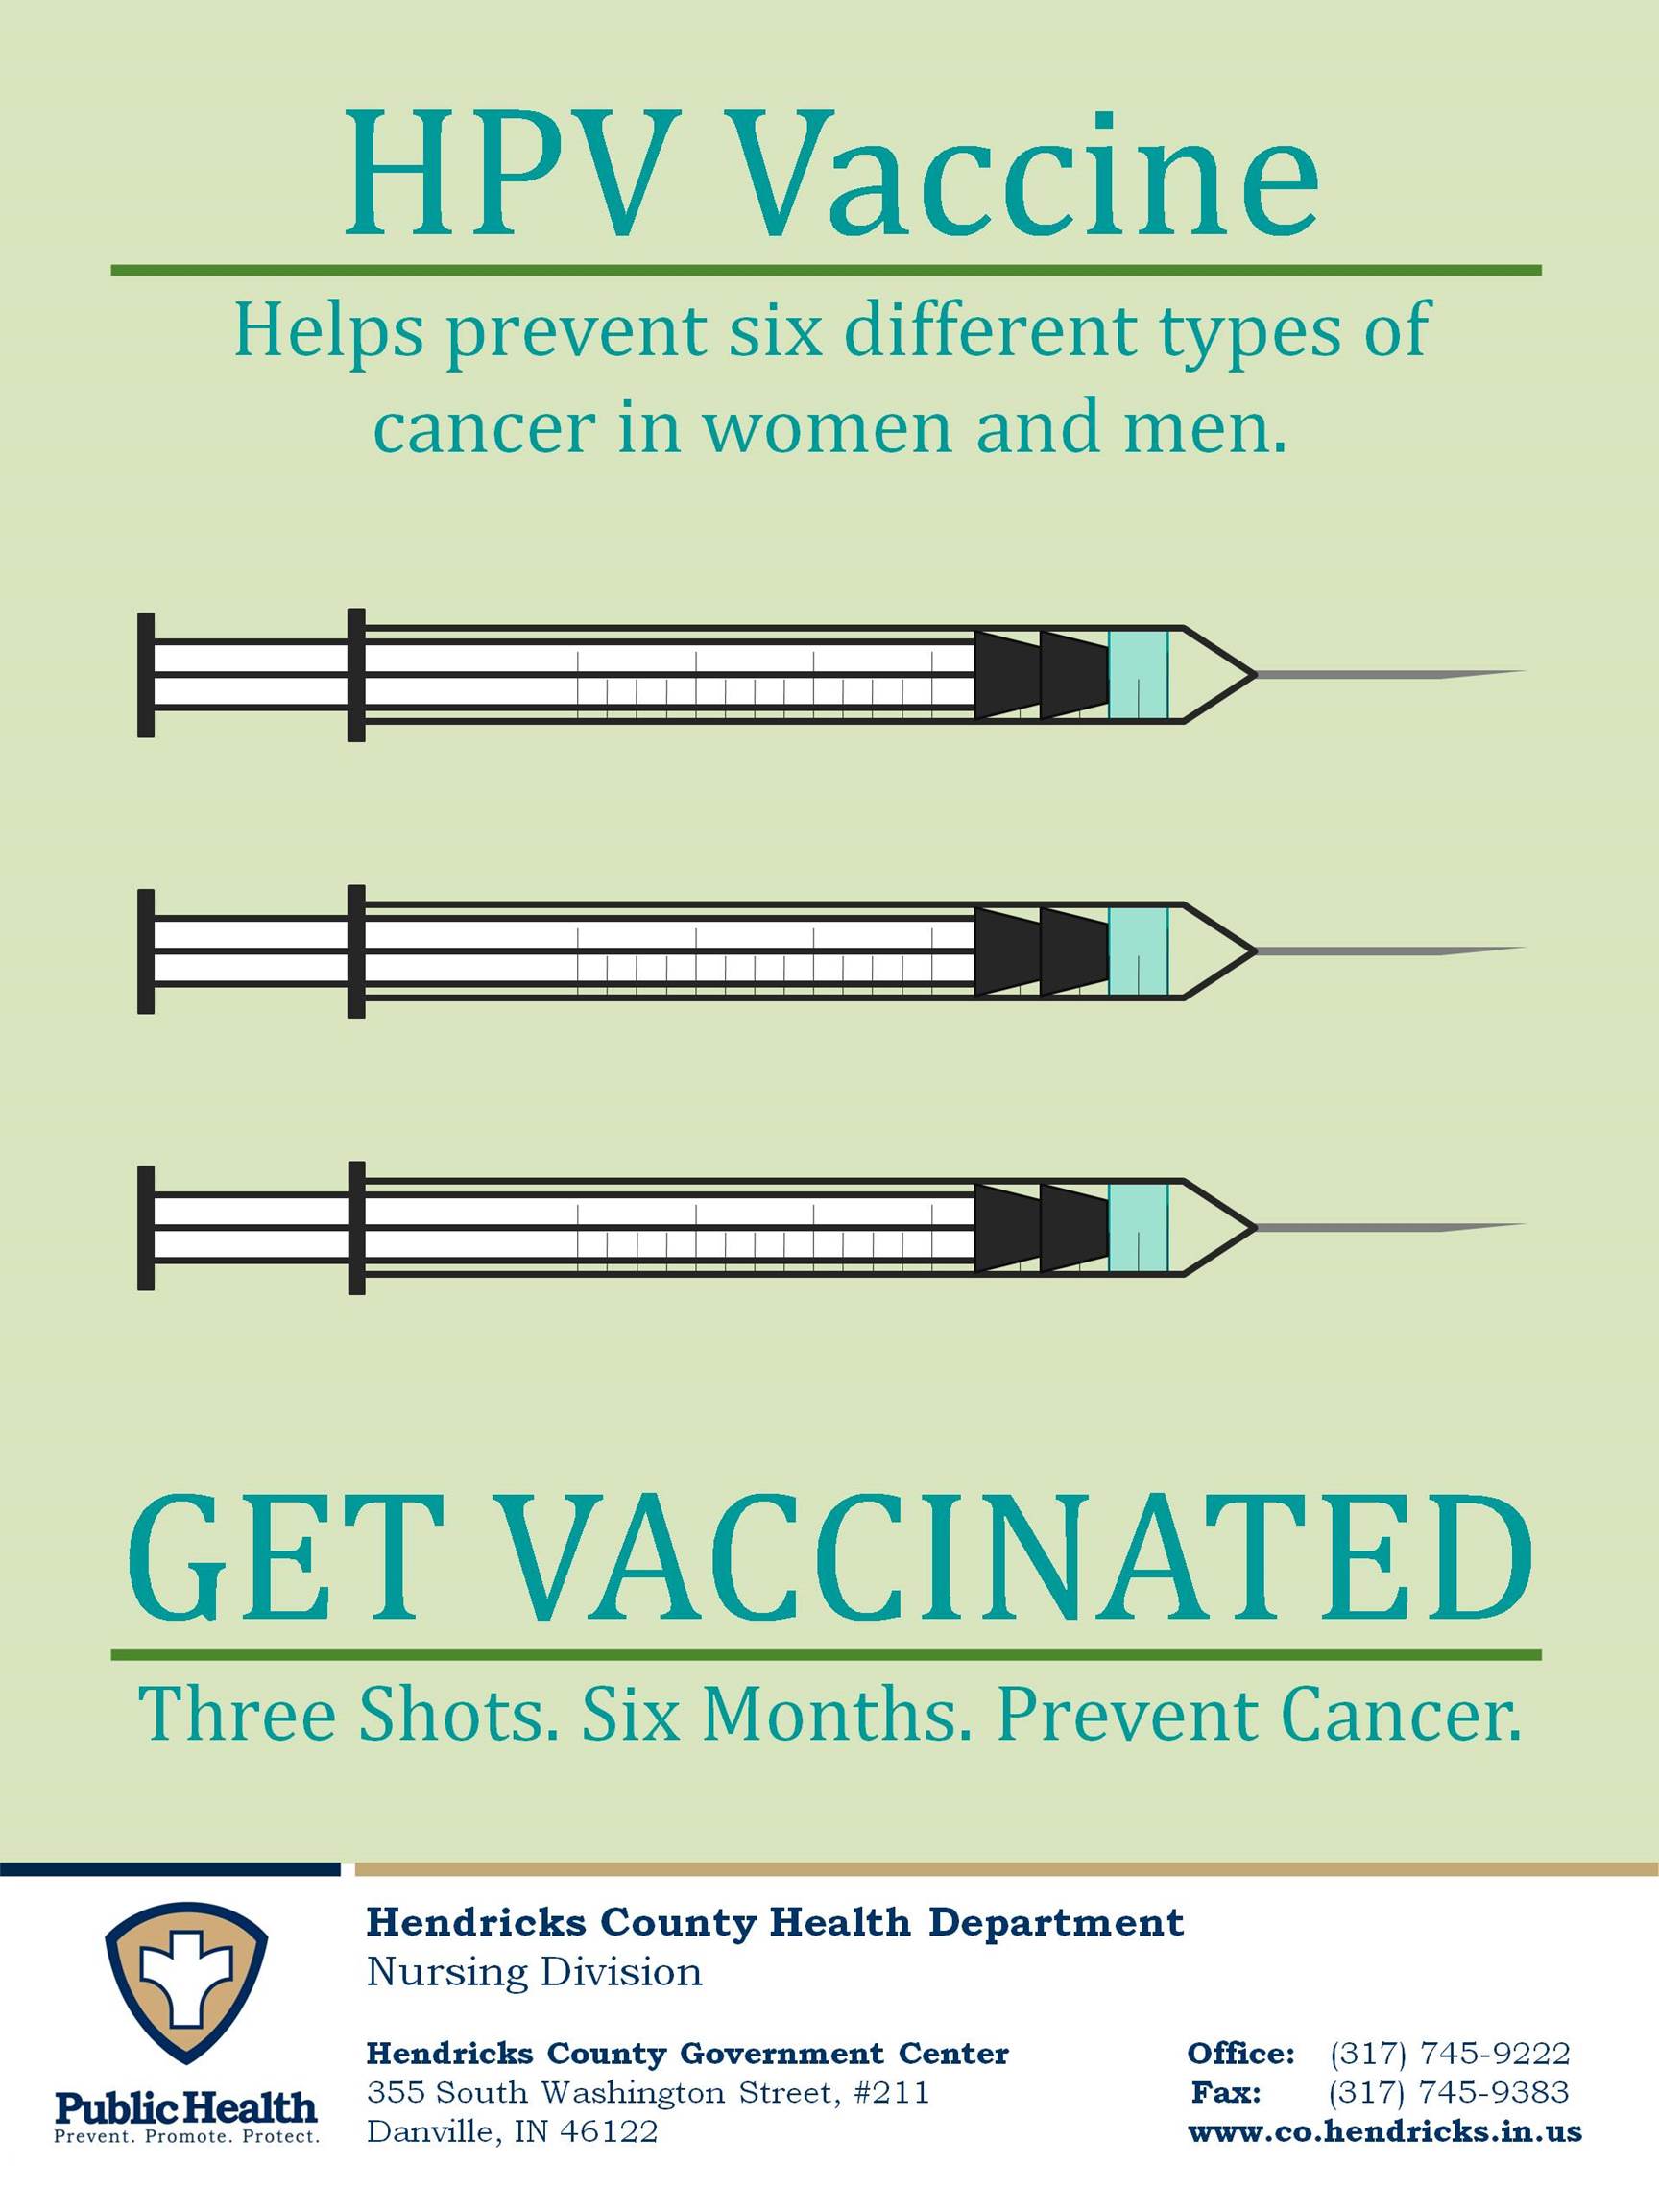 HPV Vaccine Poster